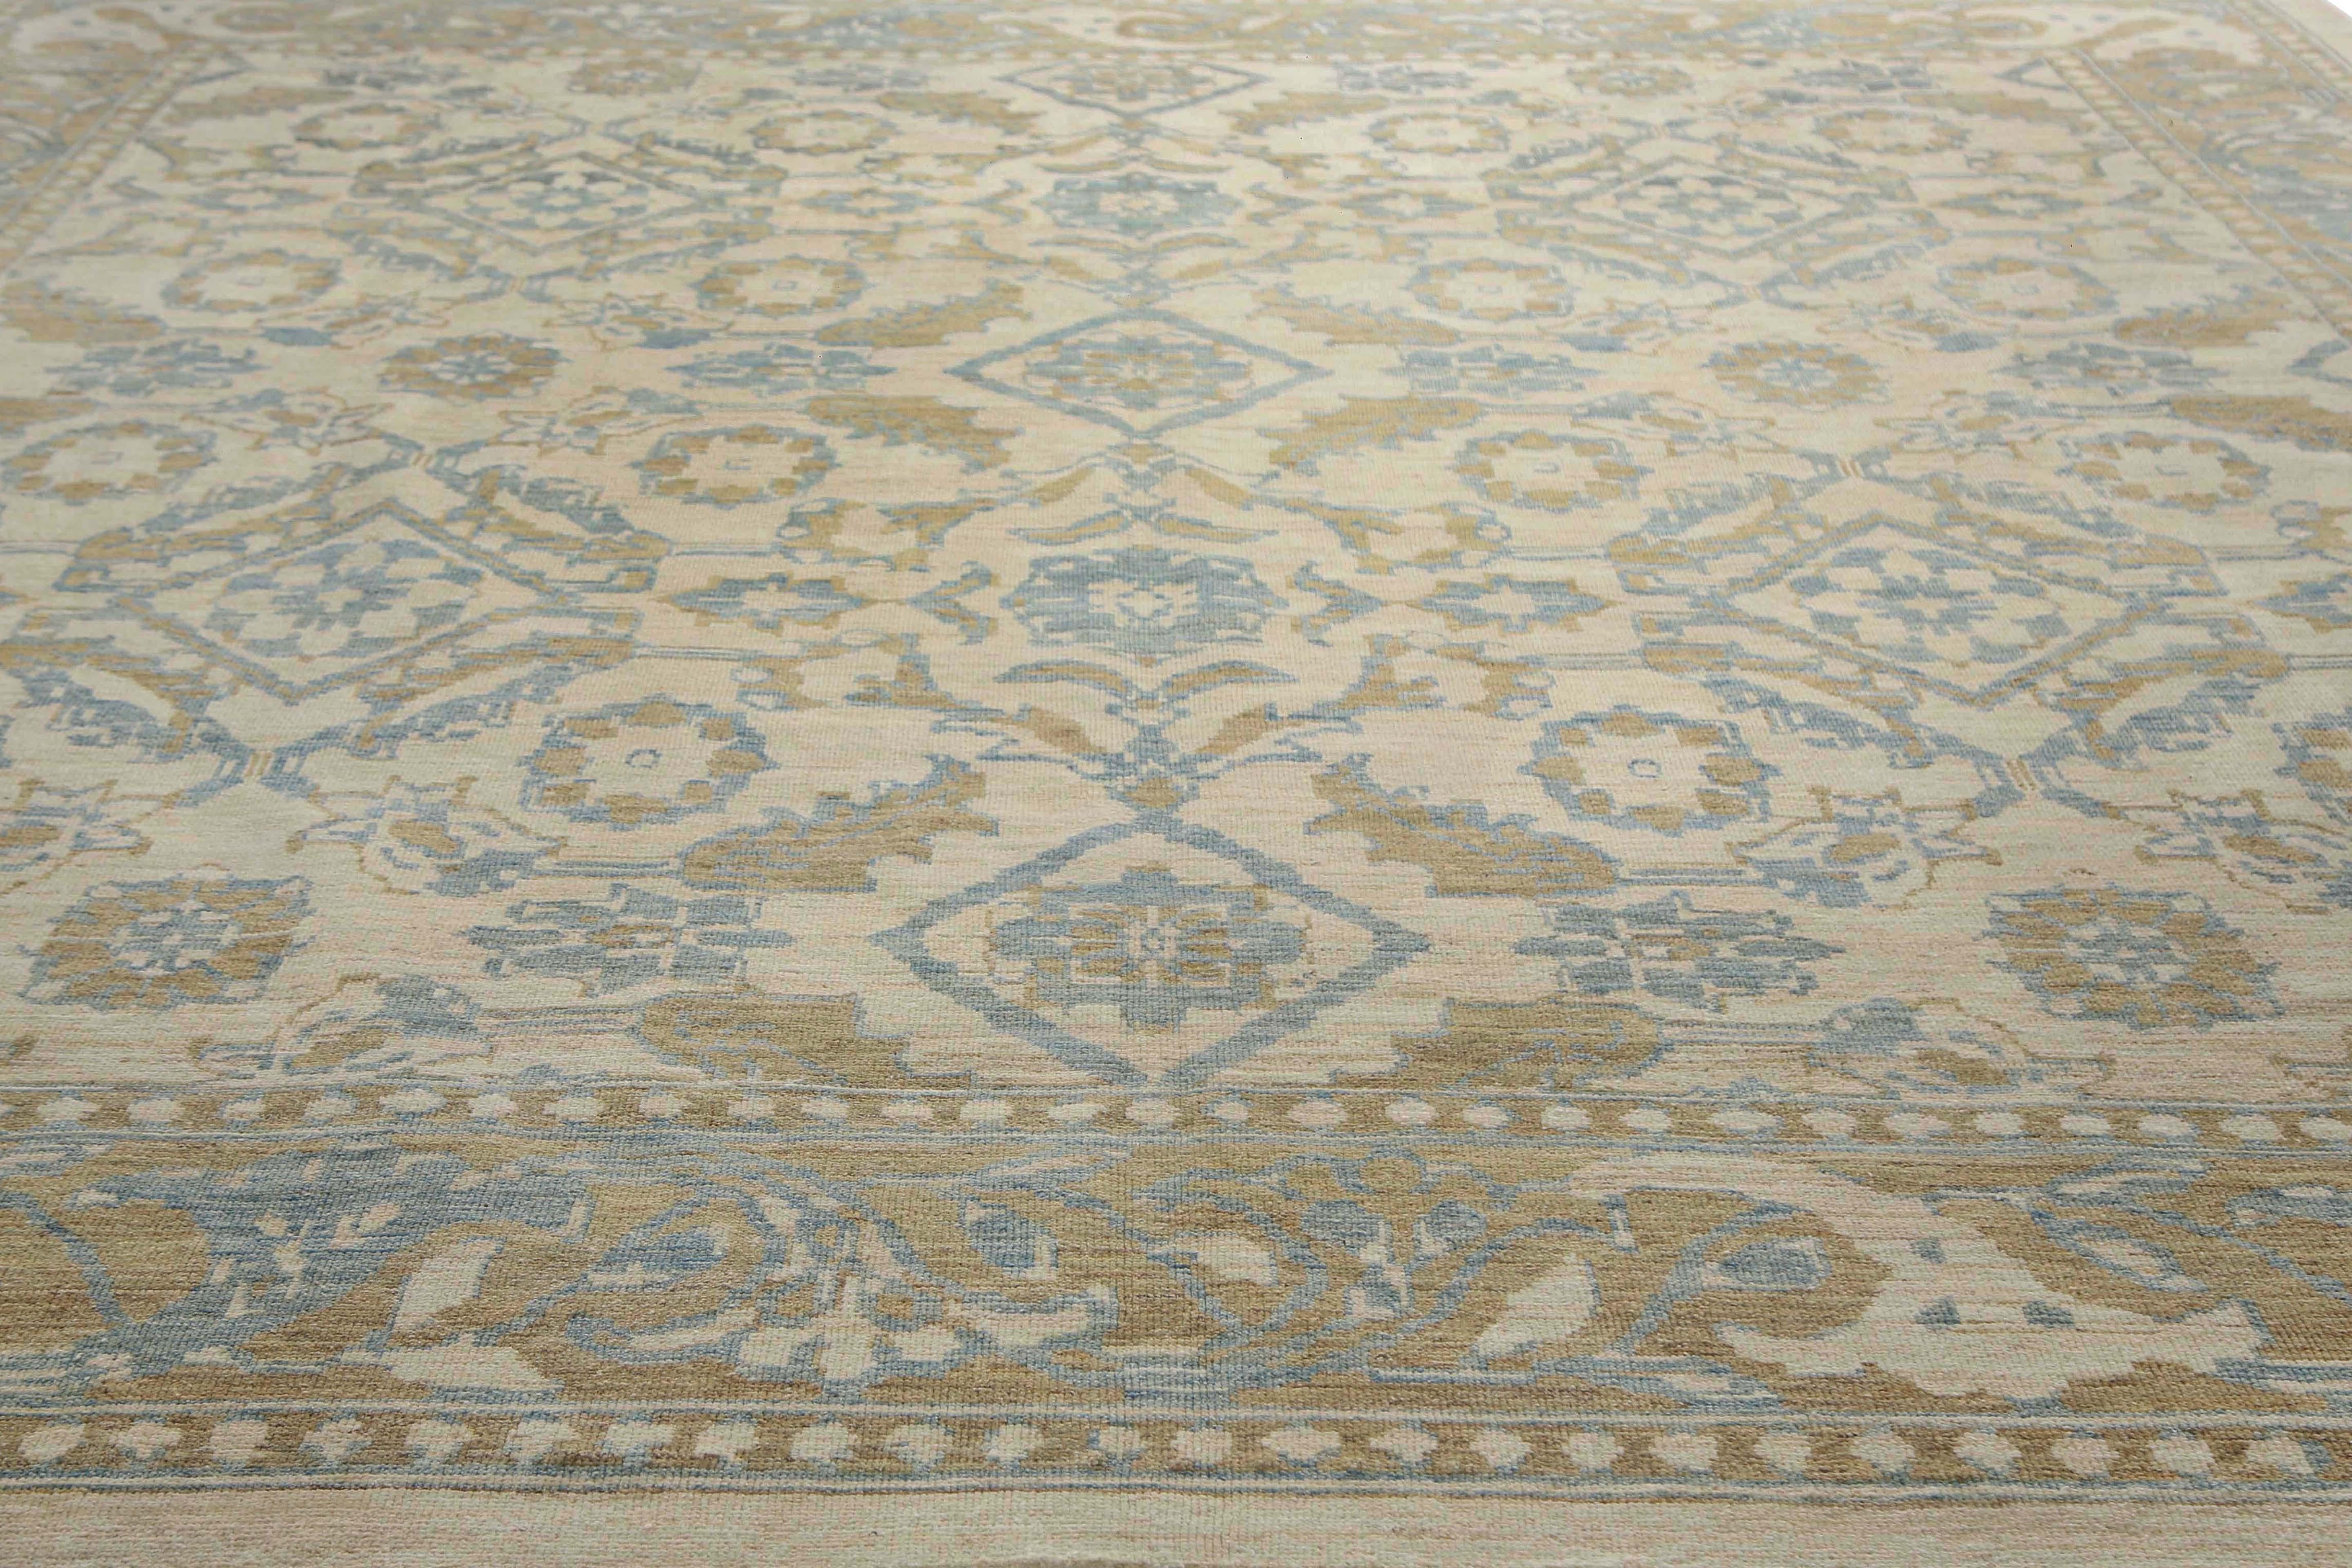 Contemporary Luxurious Handmade Sultanabad Rug - Transitional Design, Blue, Green, and Yellow For Sale